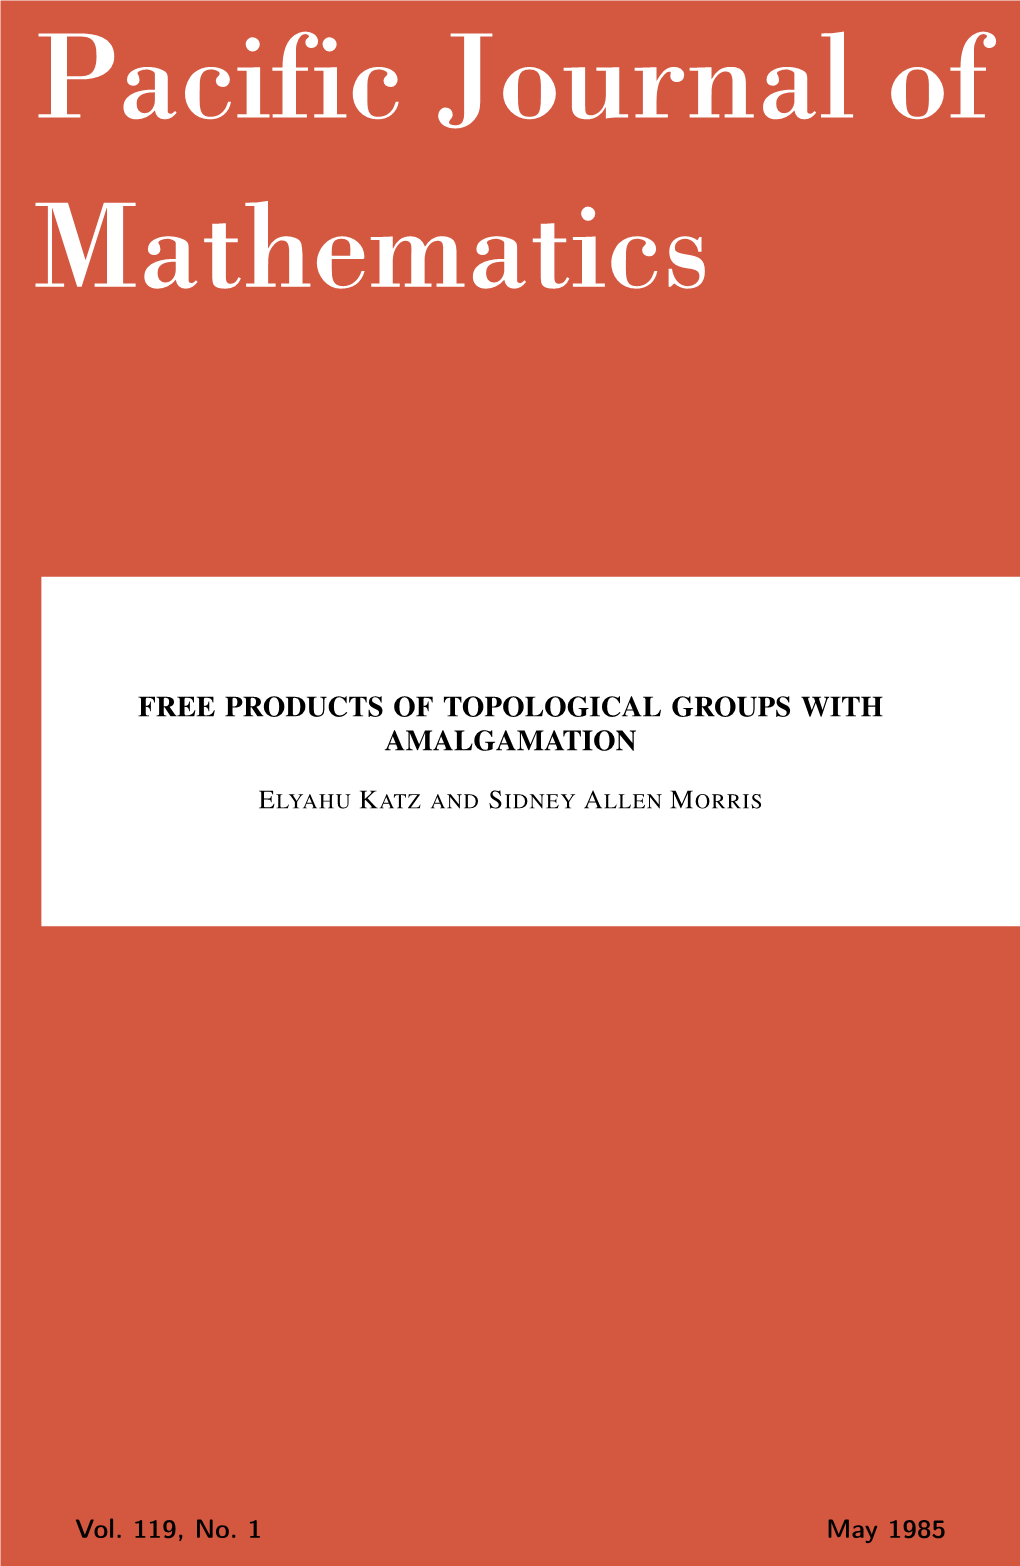 Free Products of Topological Groups with Amalgamation